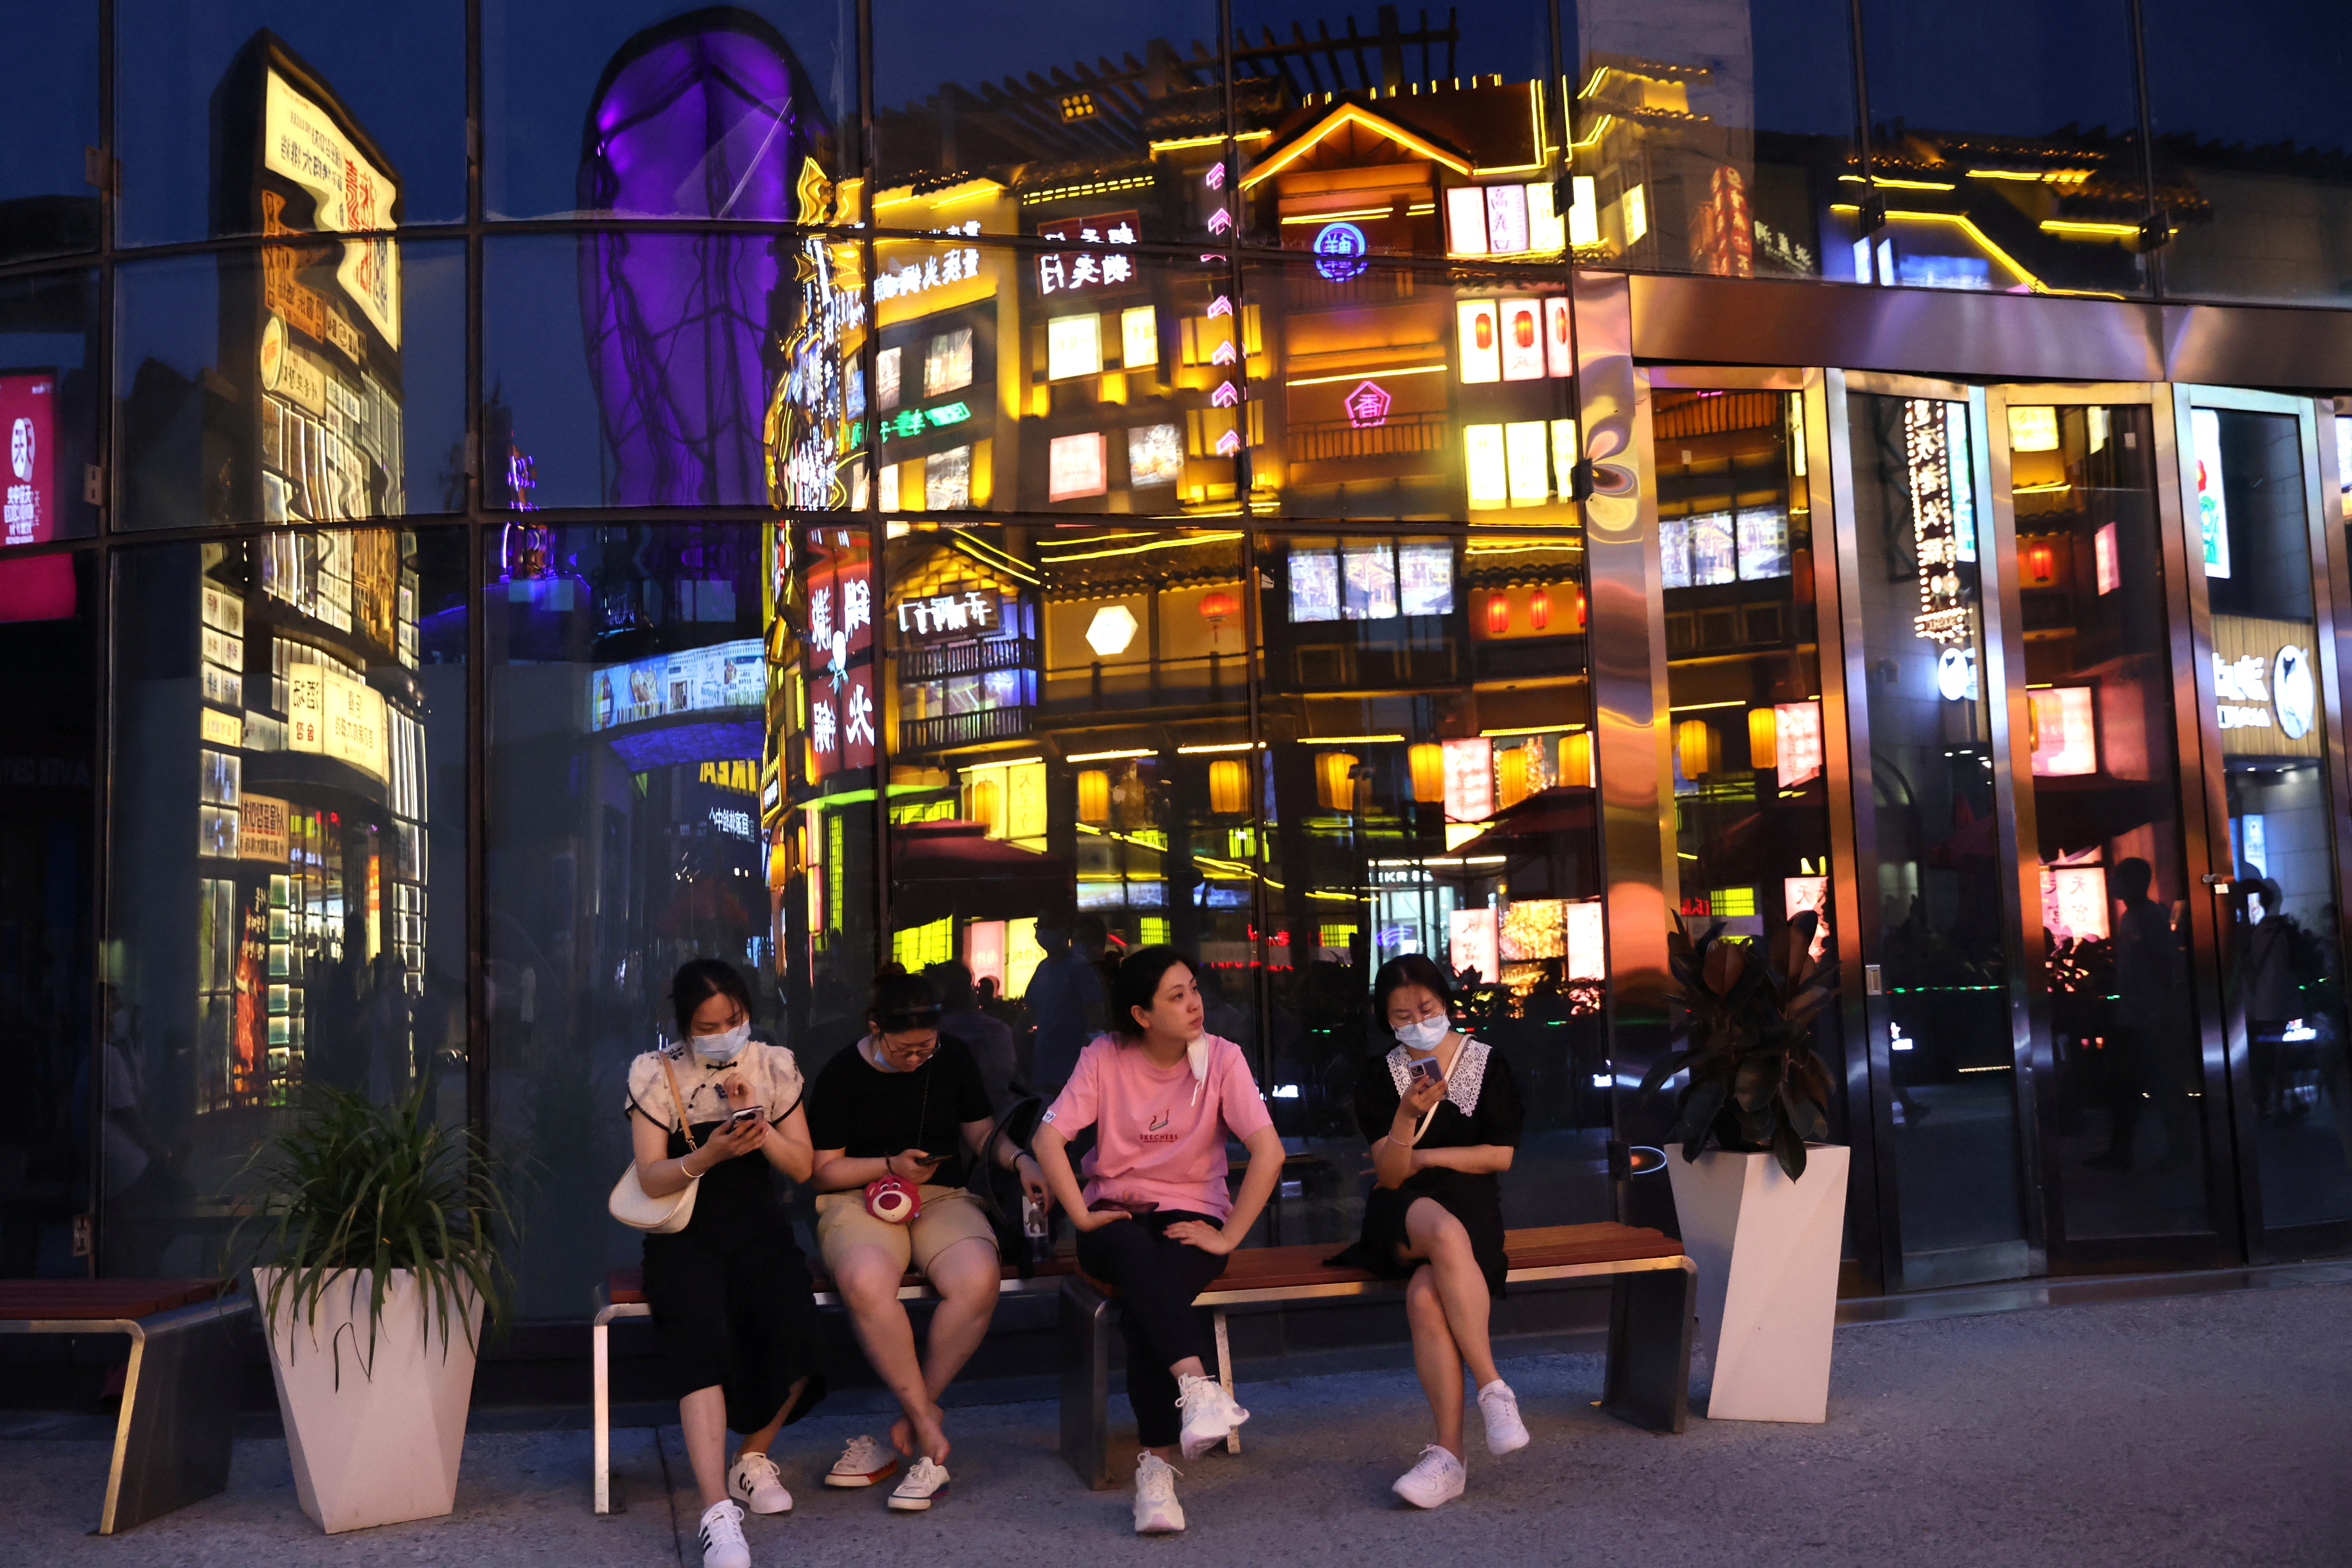 Customers dine at a restaurant at a shopping area in Beijing